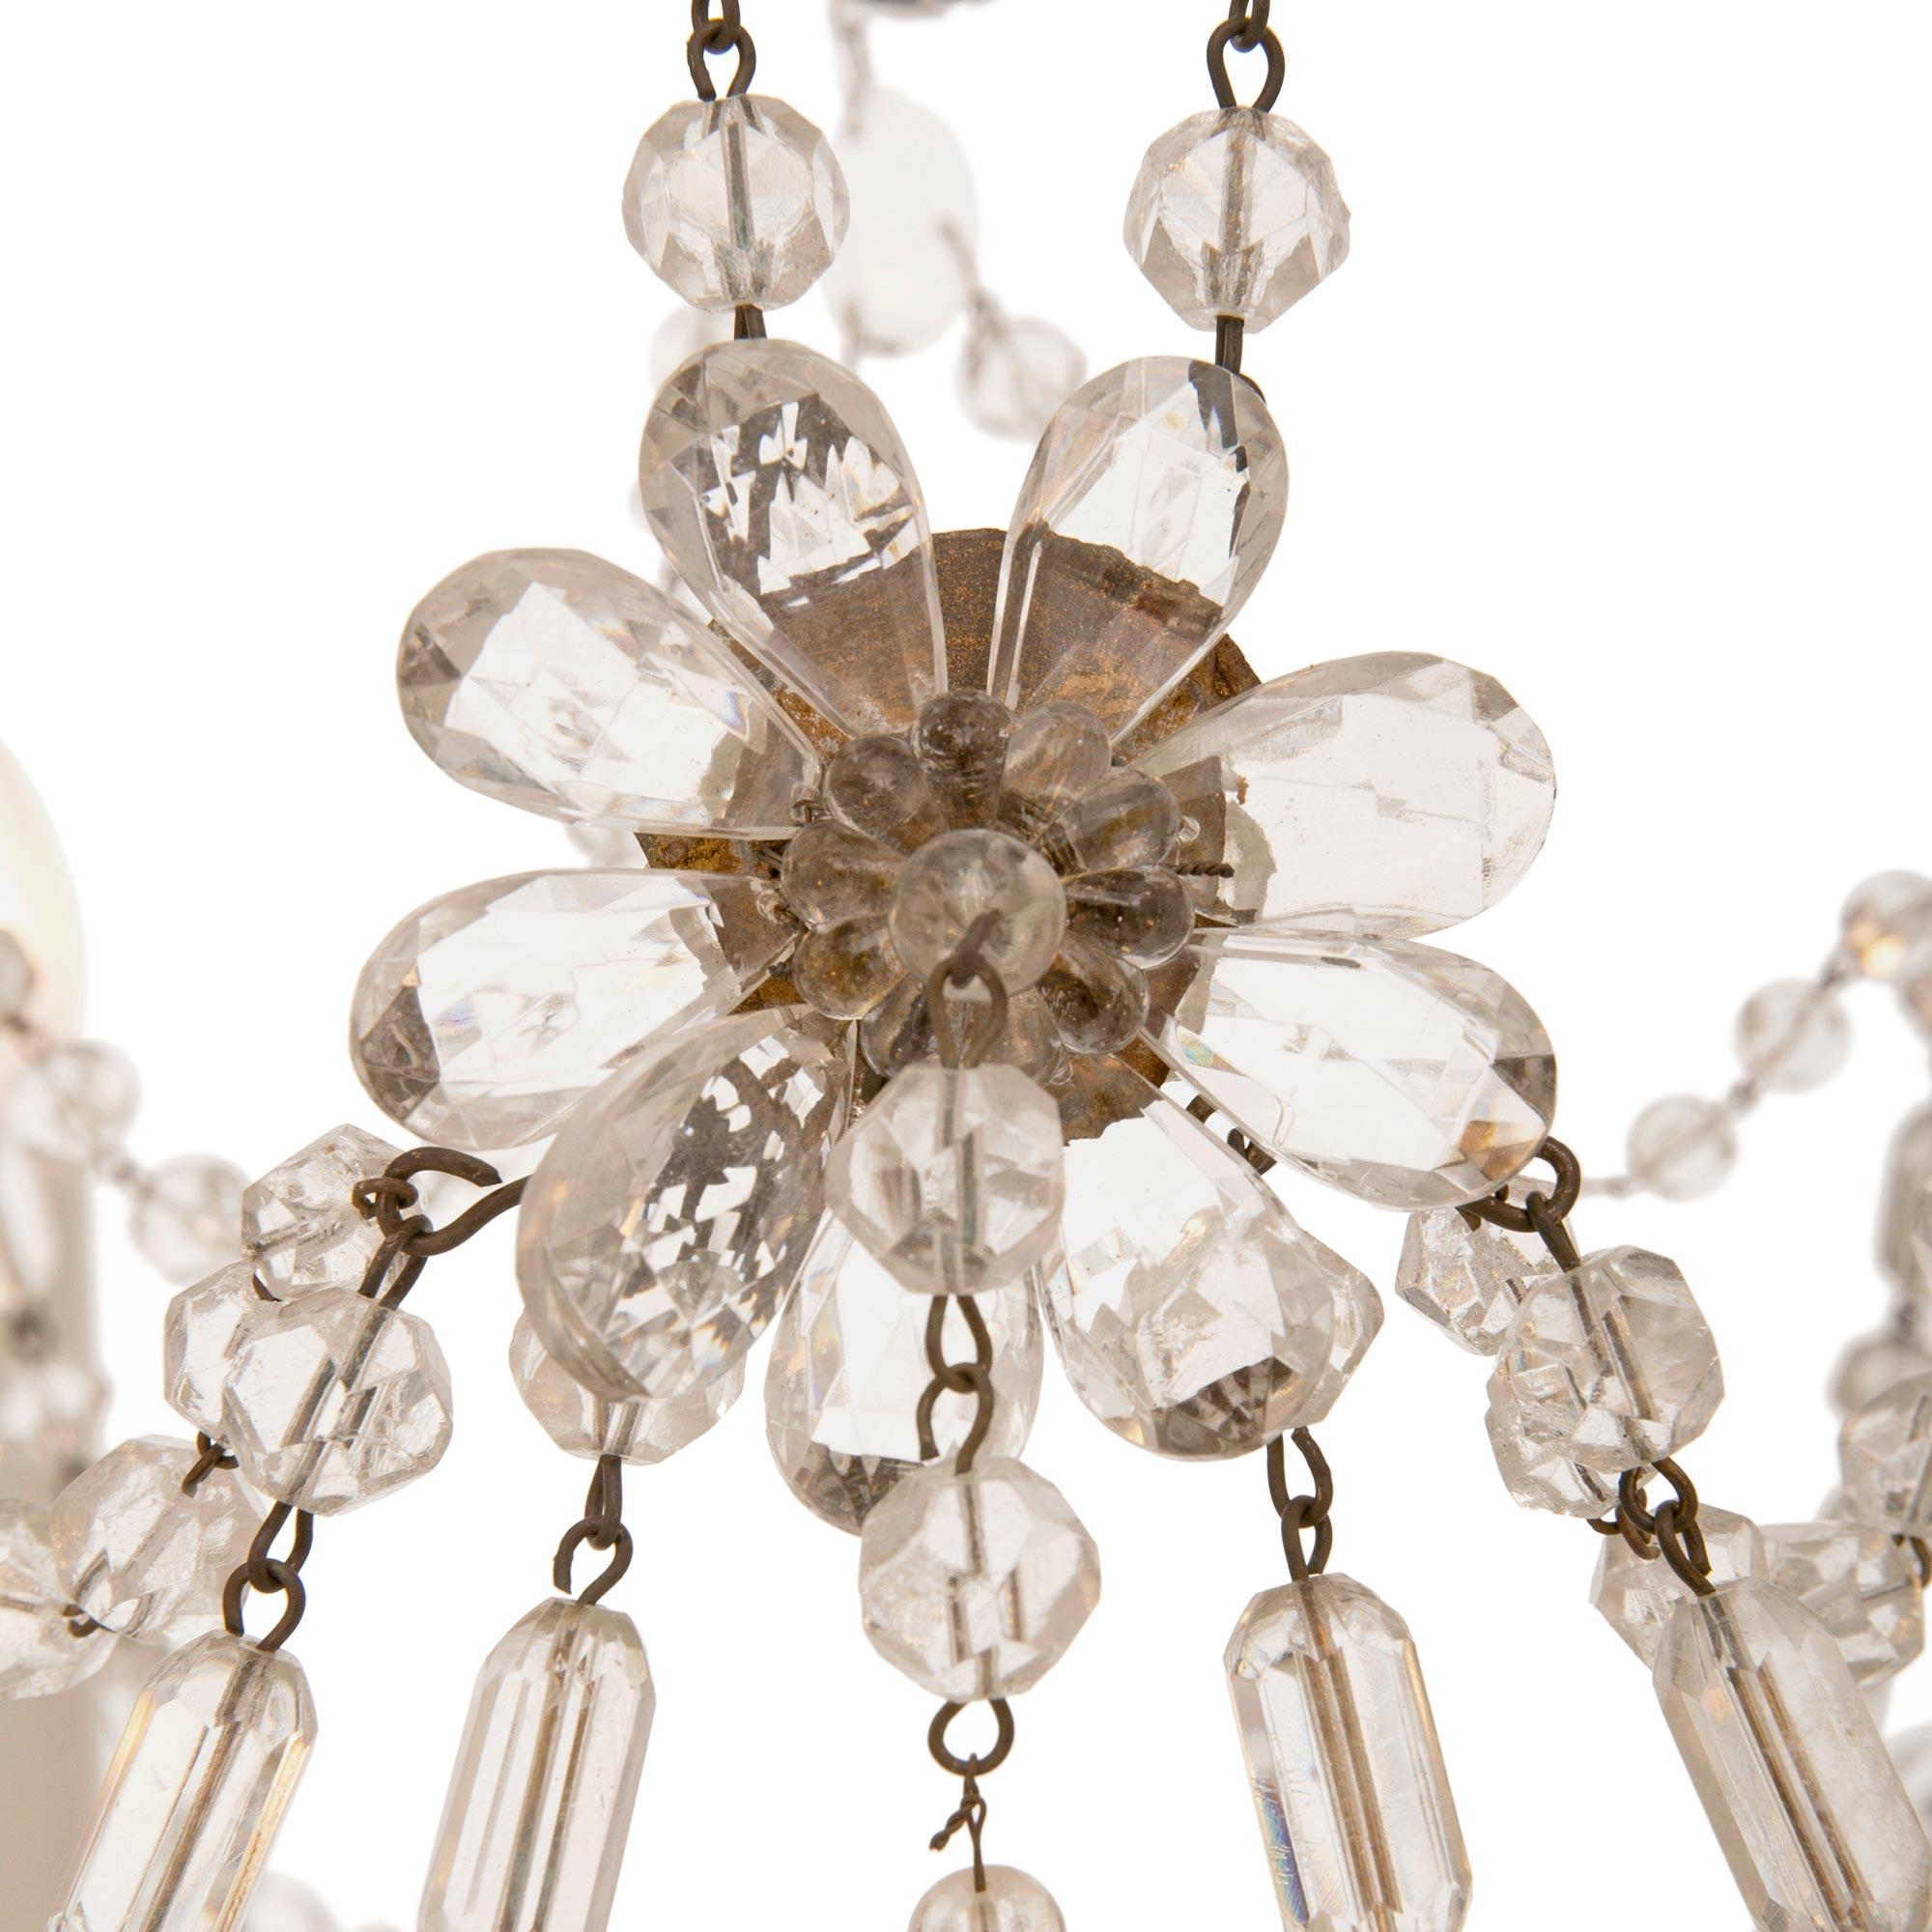 Italian 19th Century Louis XVI St. Gilt Metal And Crystal Chandelier For Sale 4